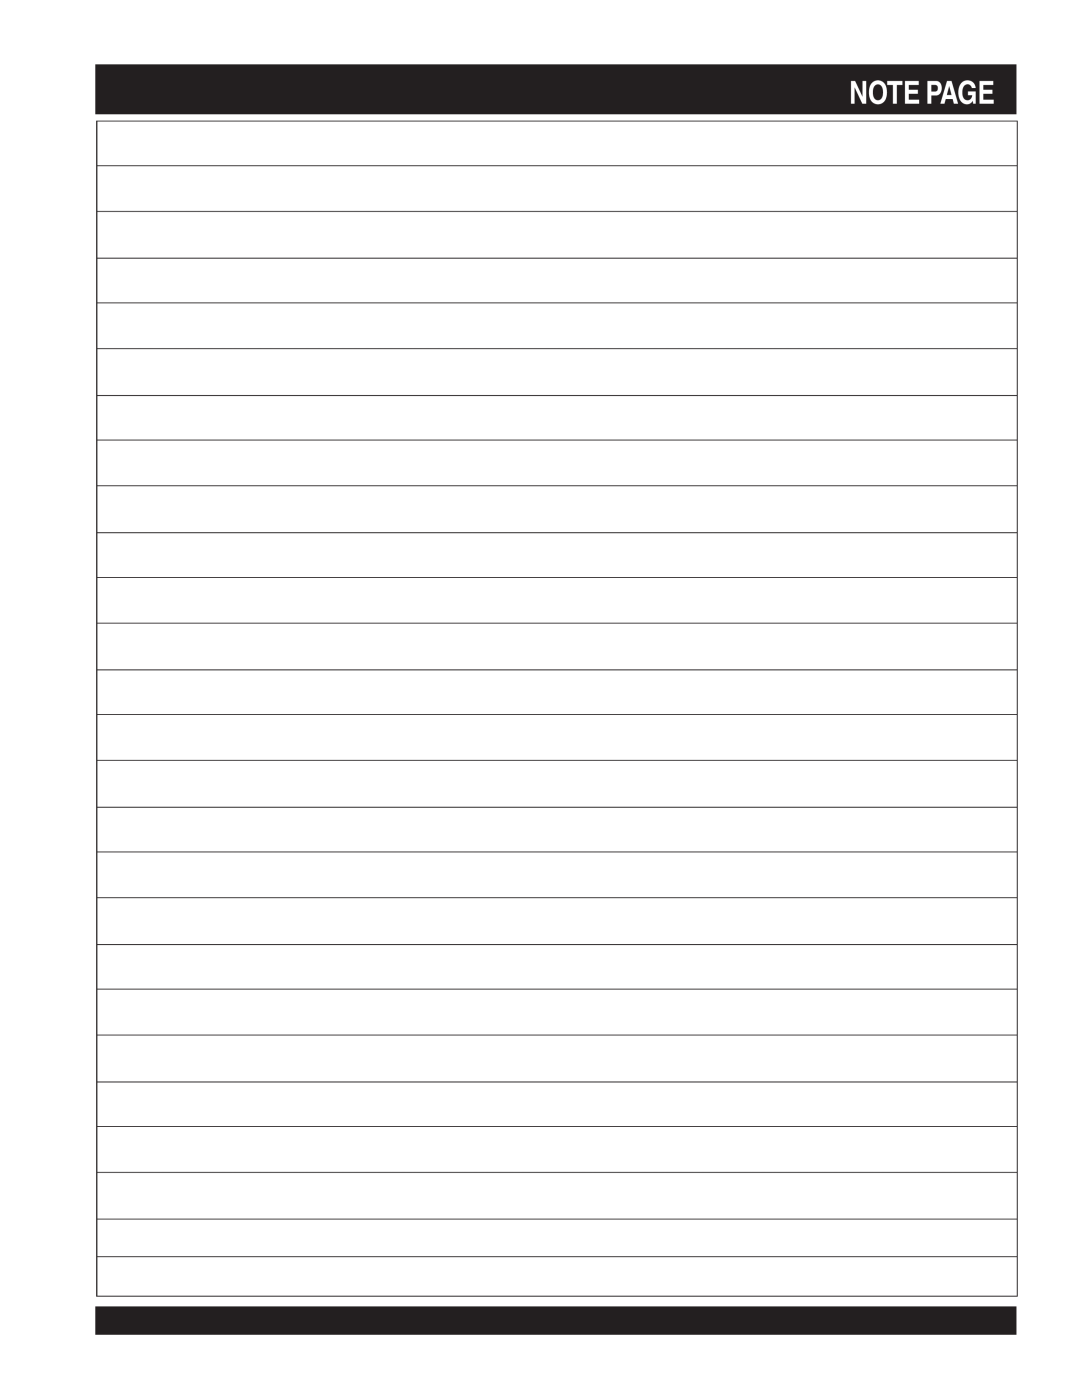 Stow SHS62A manual Note Page 